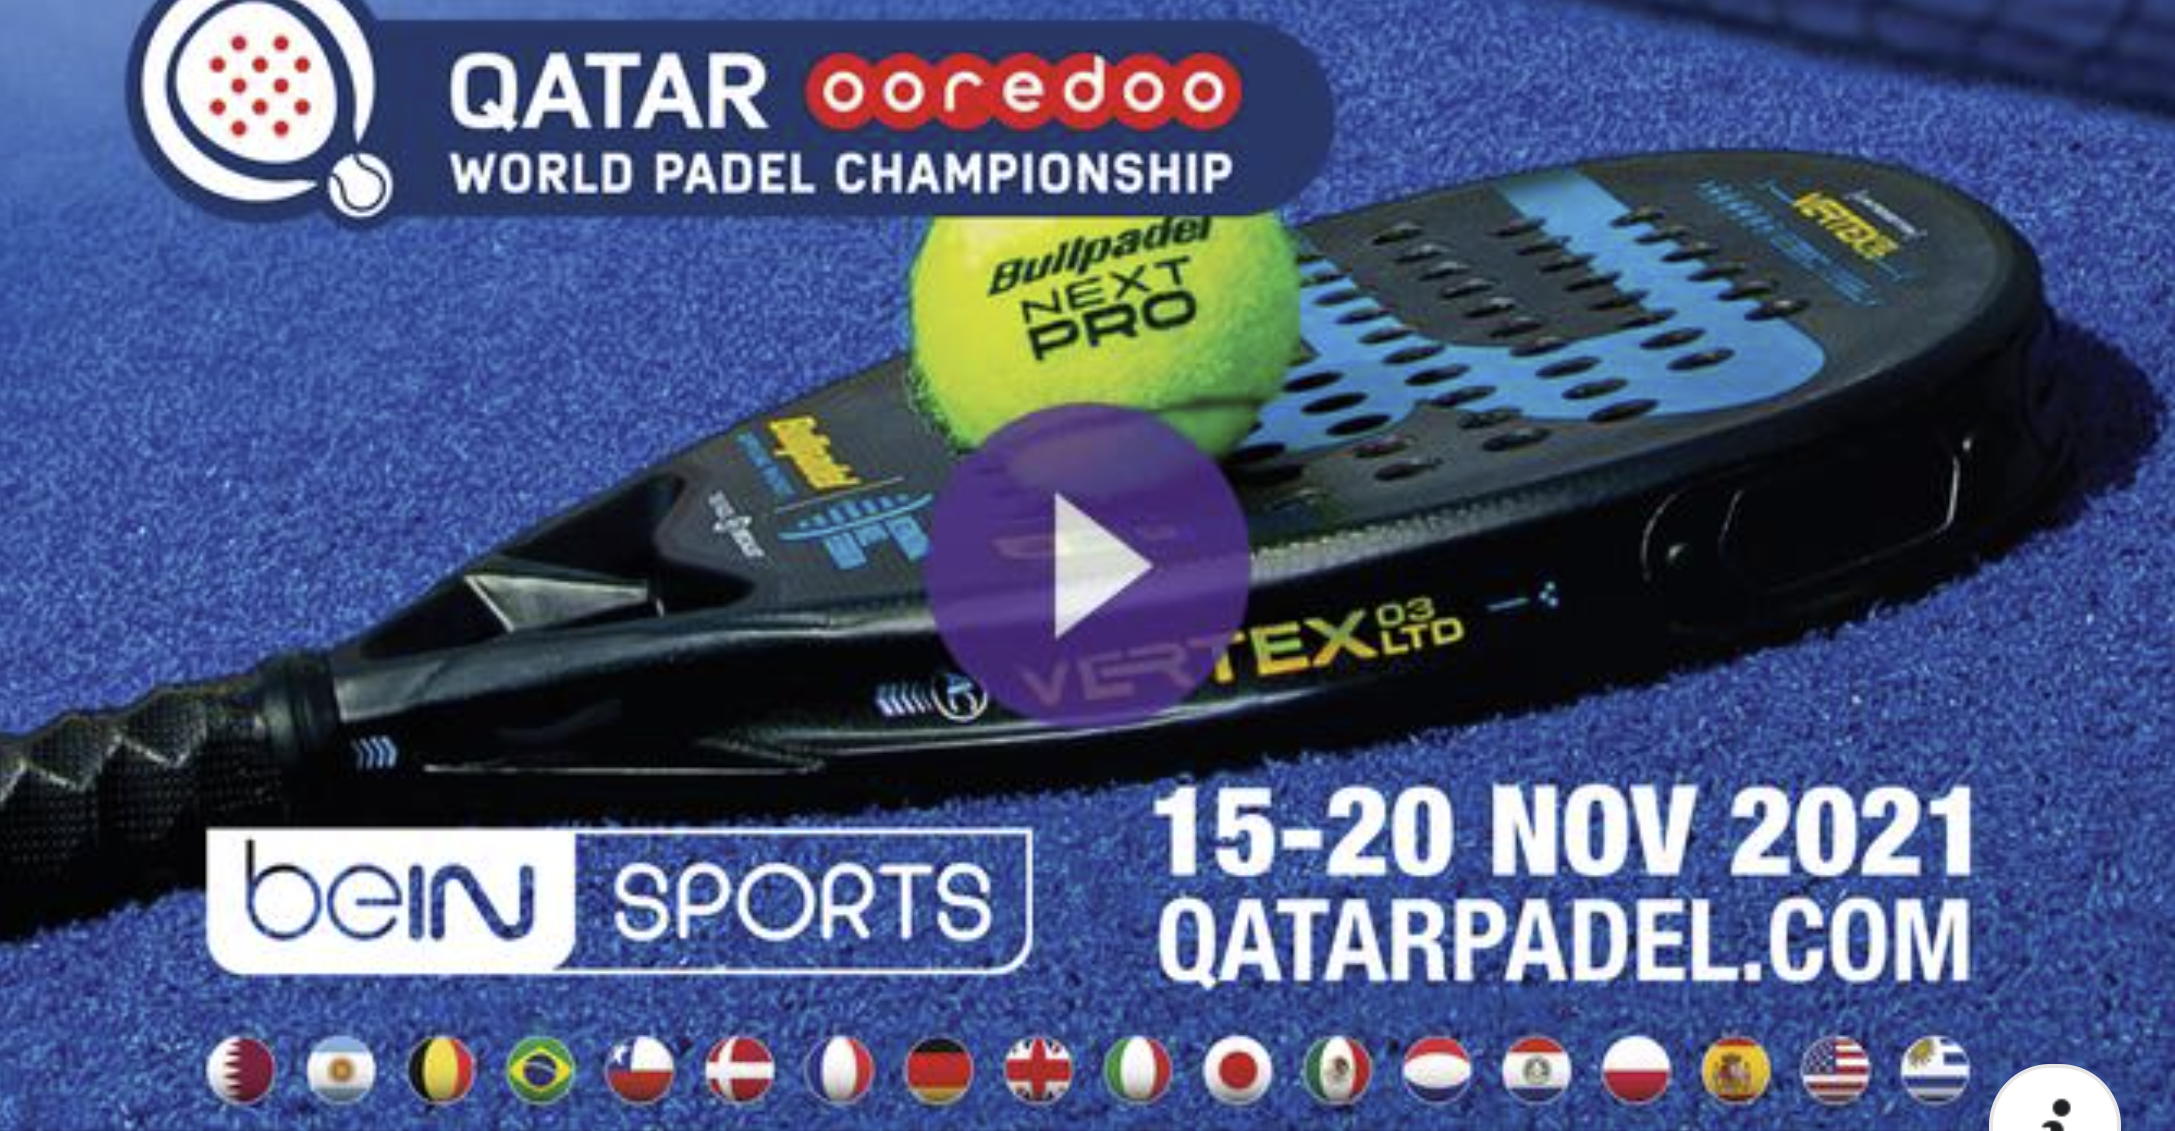 Official: BeIn Media Group acquires the exclusive rights to the 15th world padel